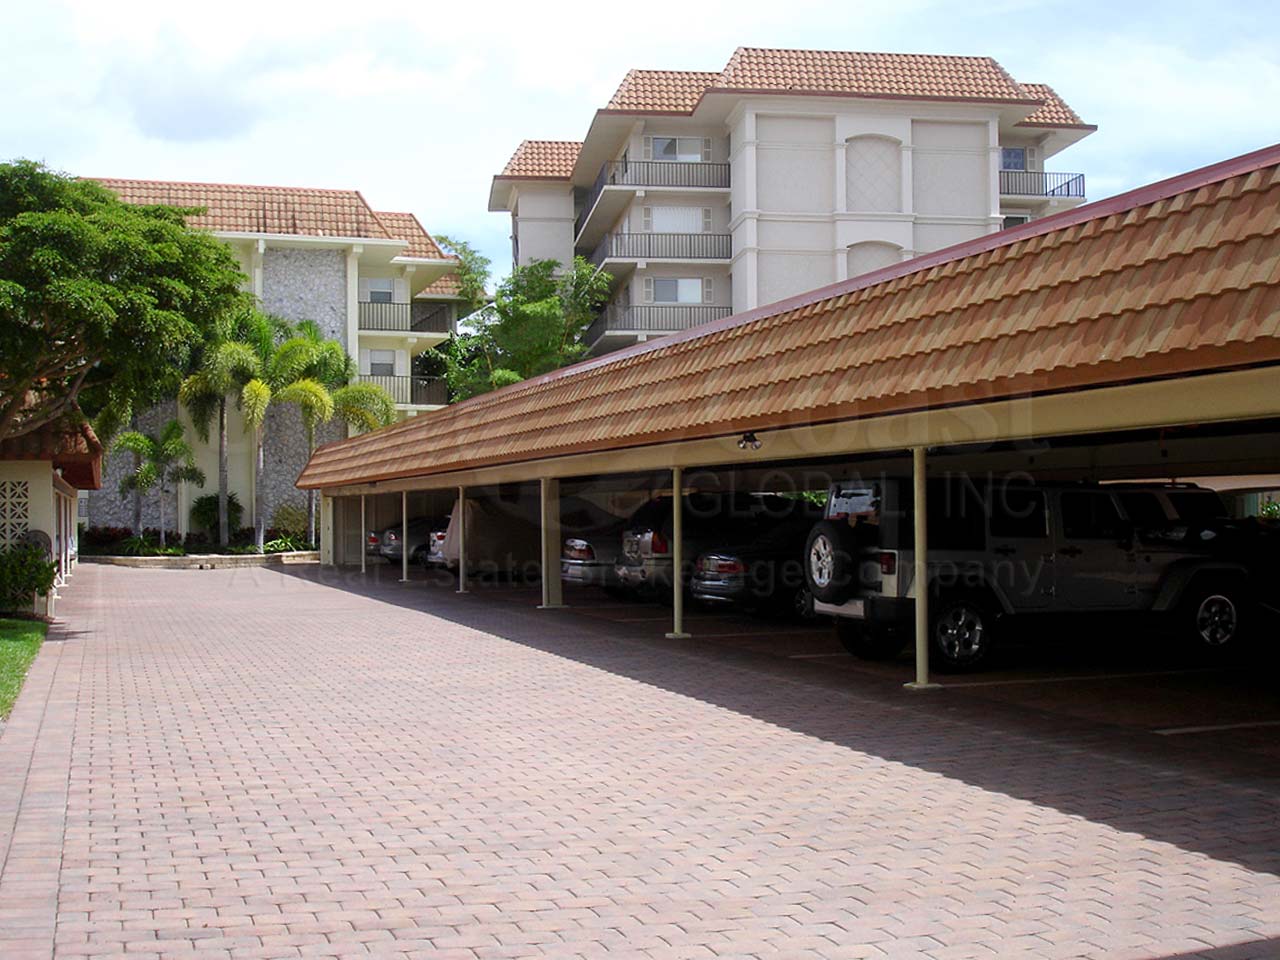 Commodore Club Covered Parking